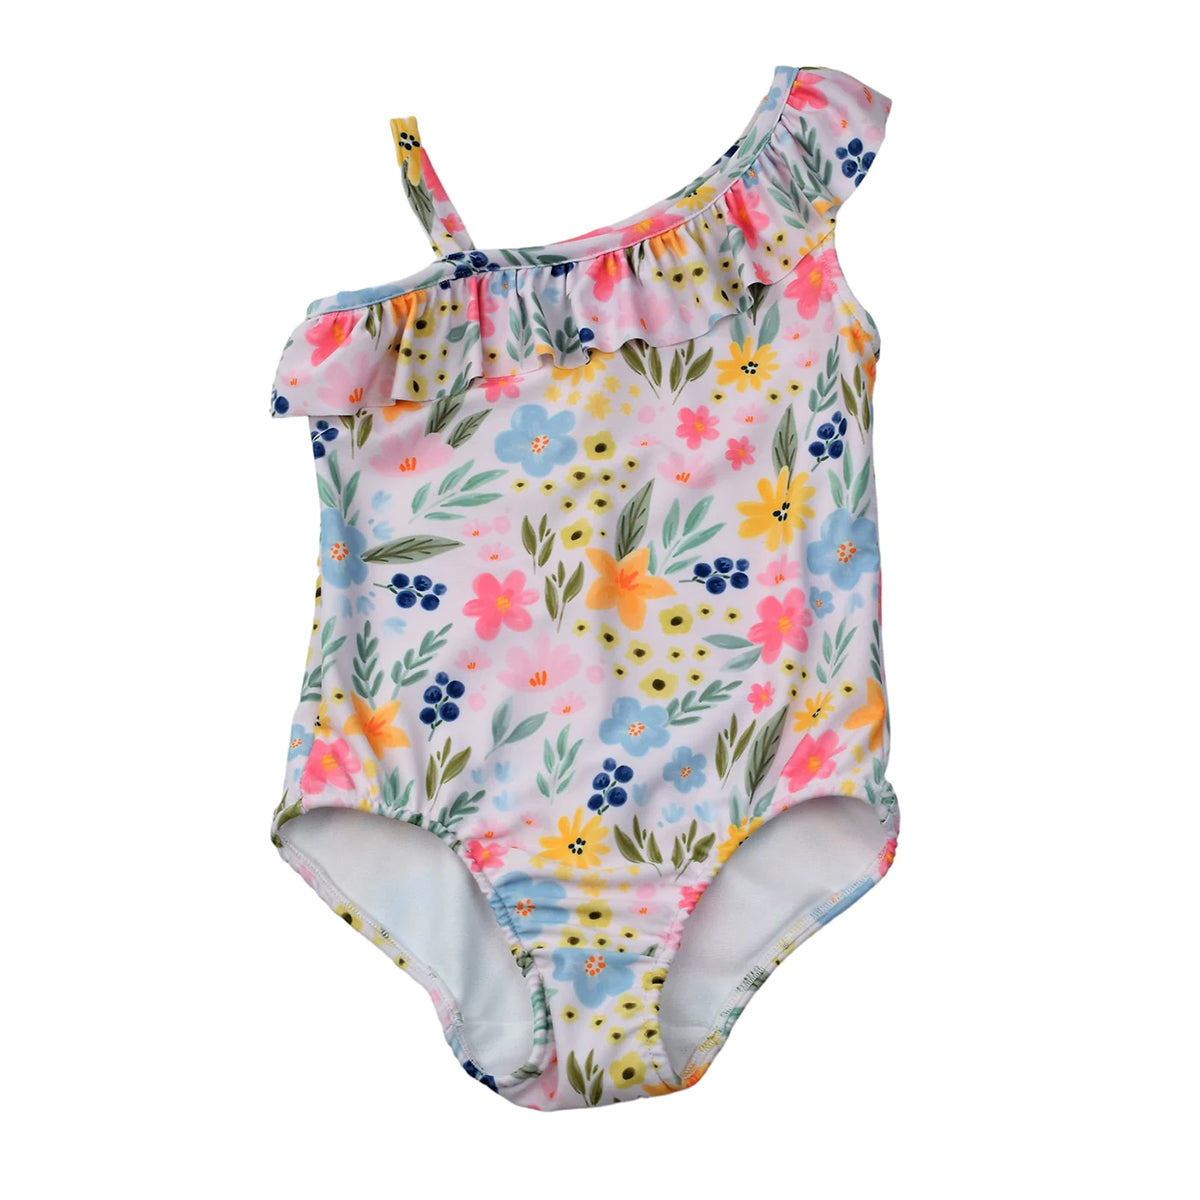 Floral Print Toddler Girl's One-Piece Bathing Suit by Funtasia Too